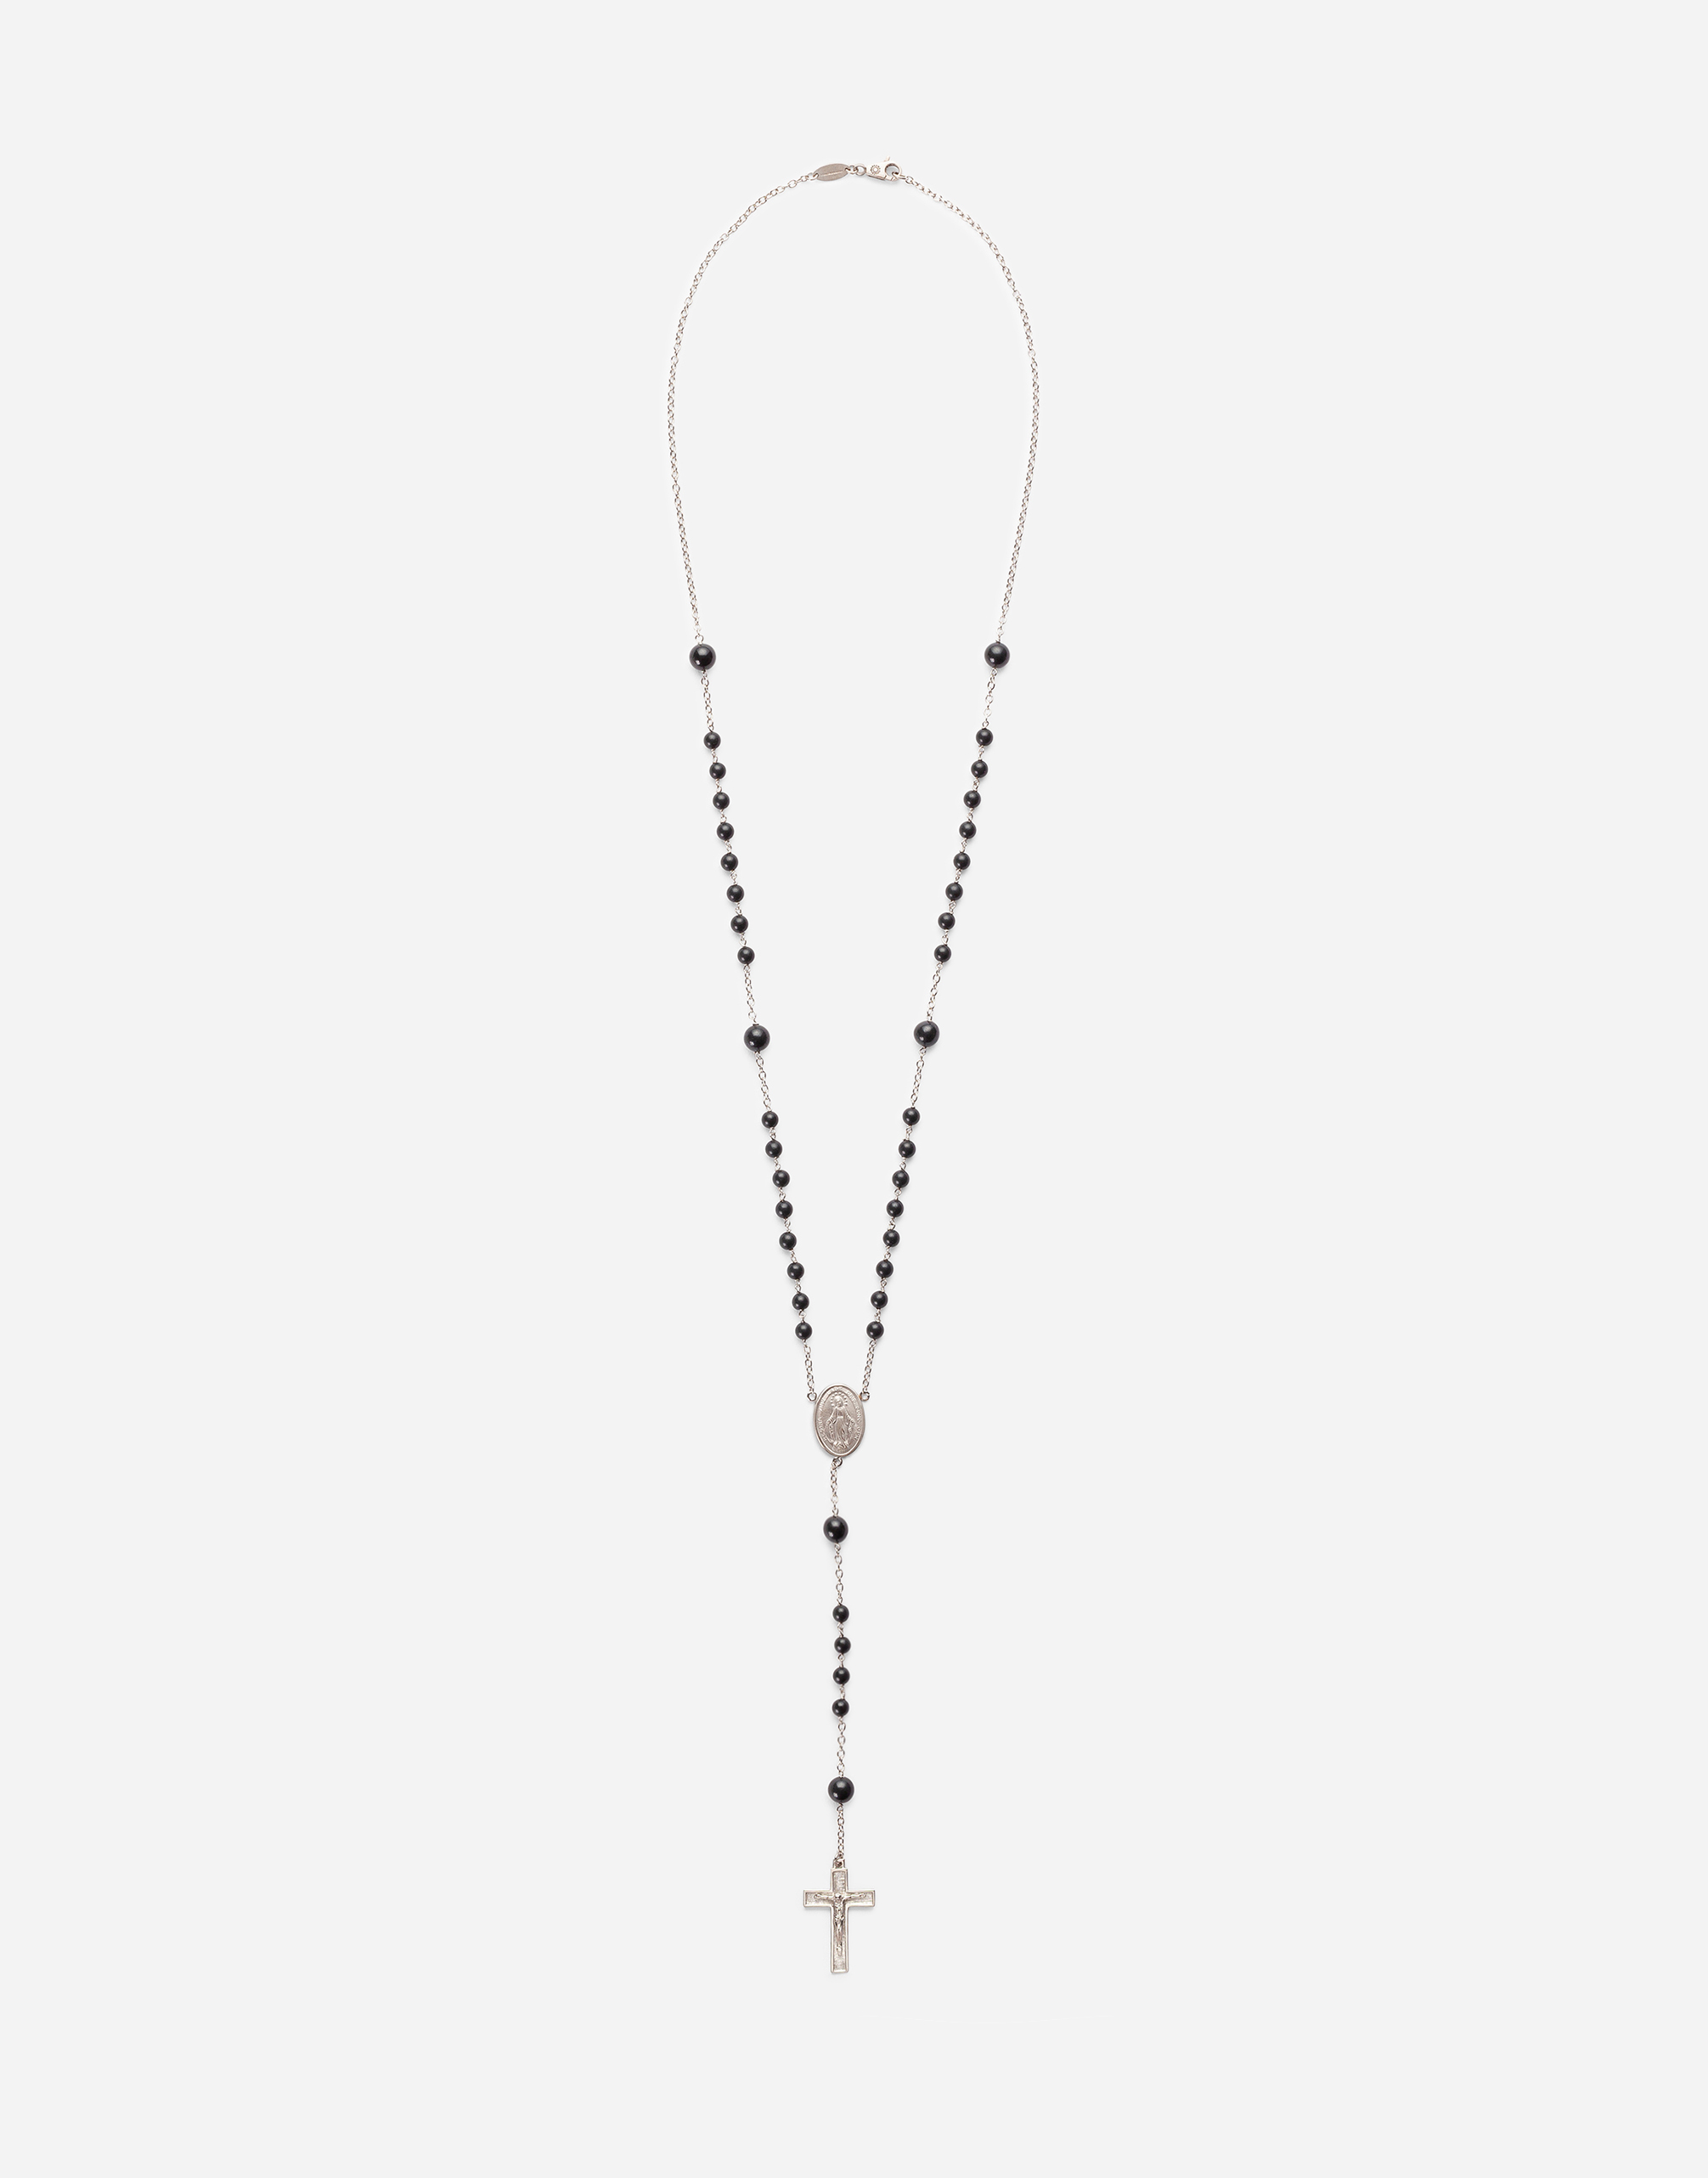 Tradition rosary necklace in yellow gold with black jades beads in Palladium